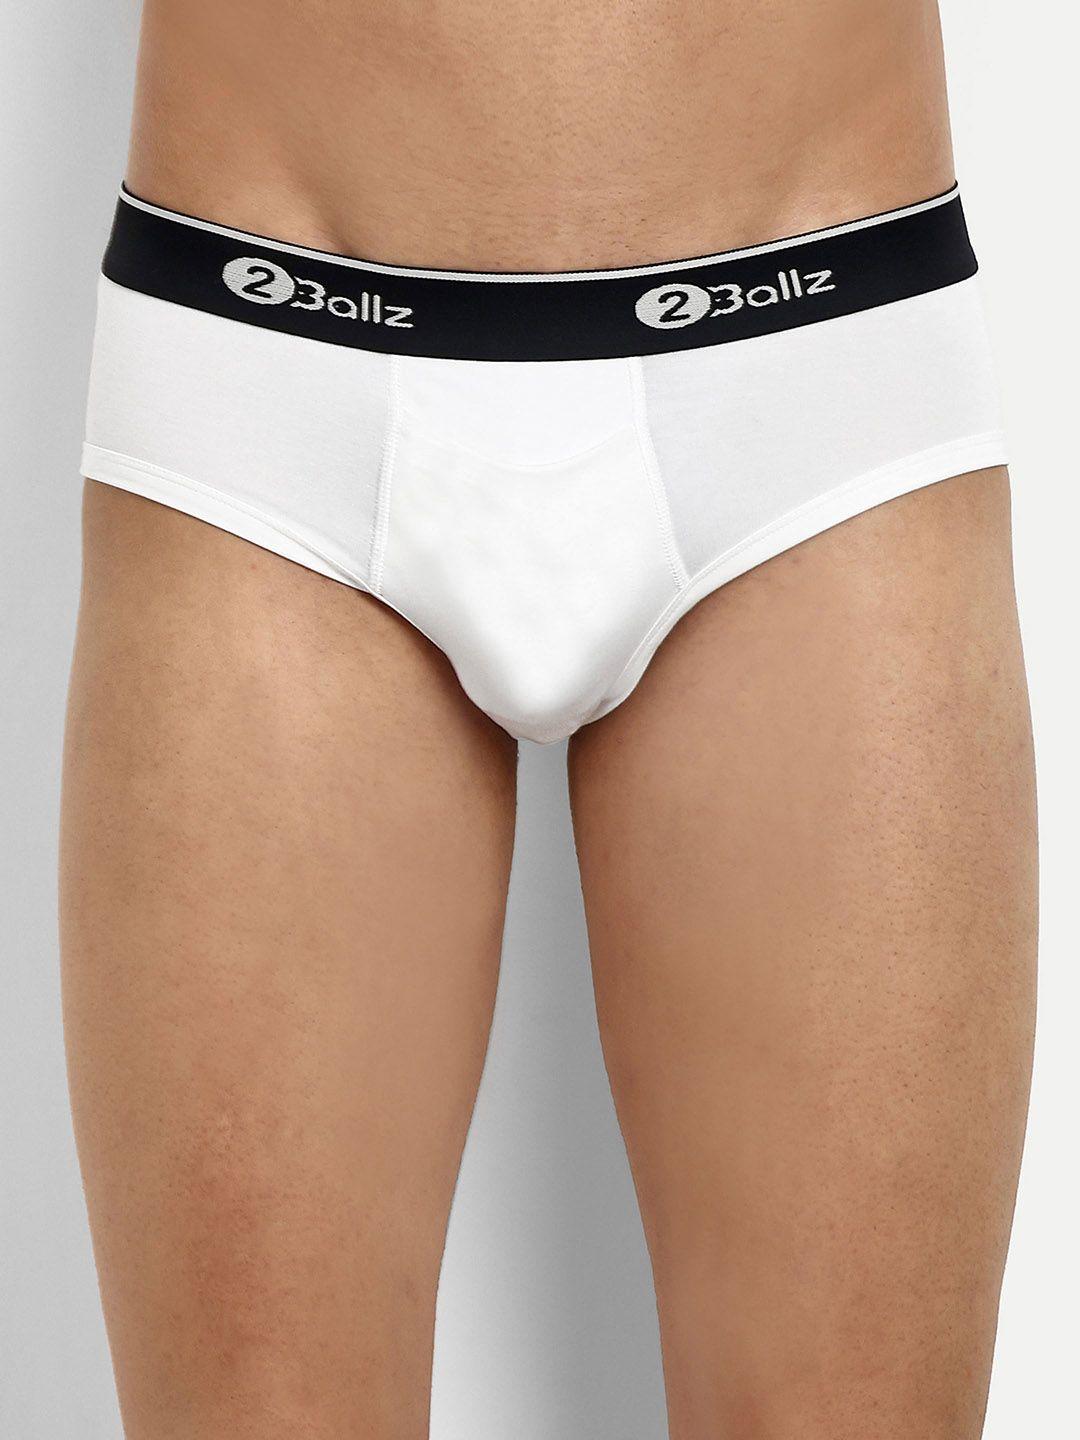 2ballz brand logo printed opening mid-rise basic brief w-1-2brb